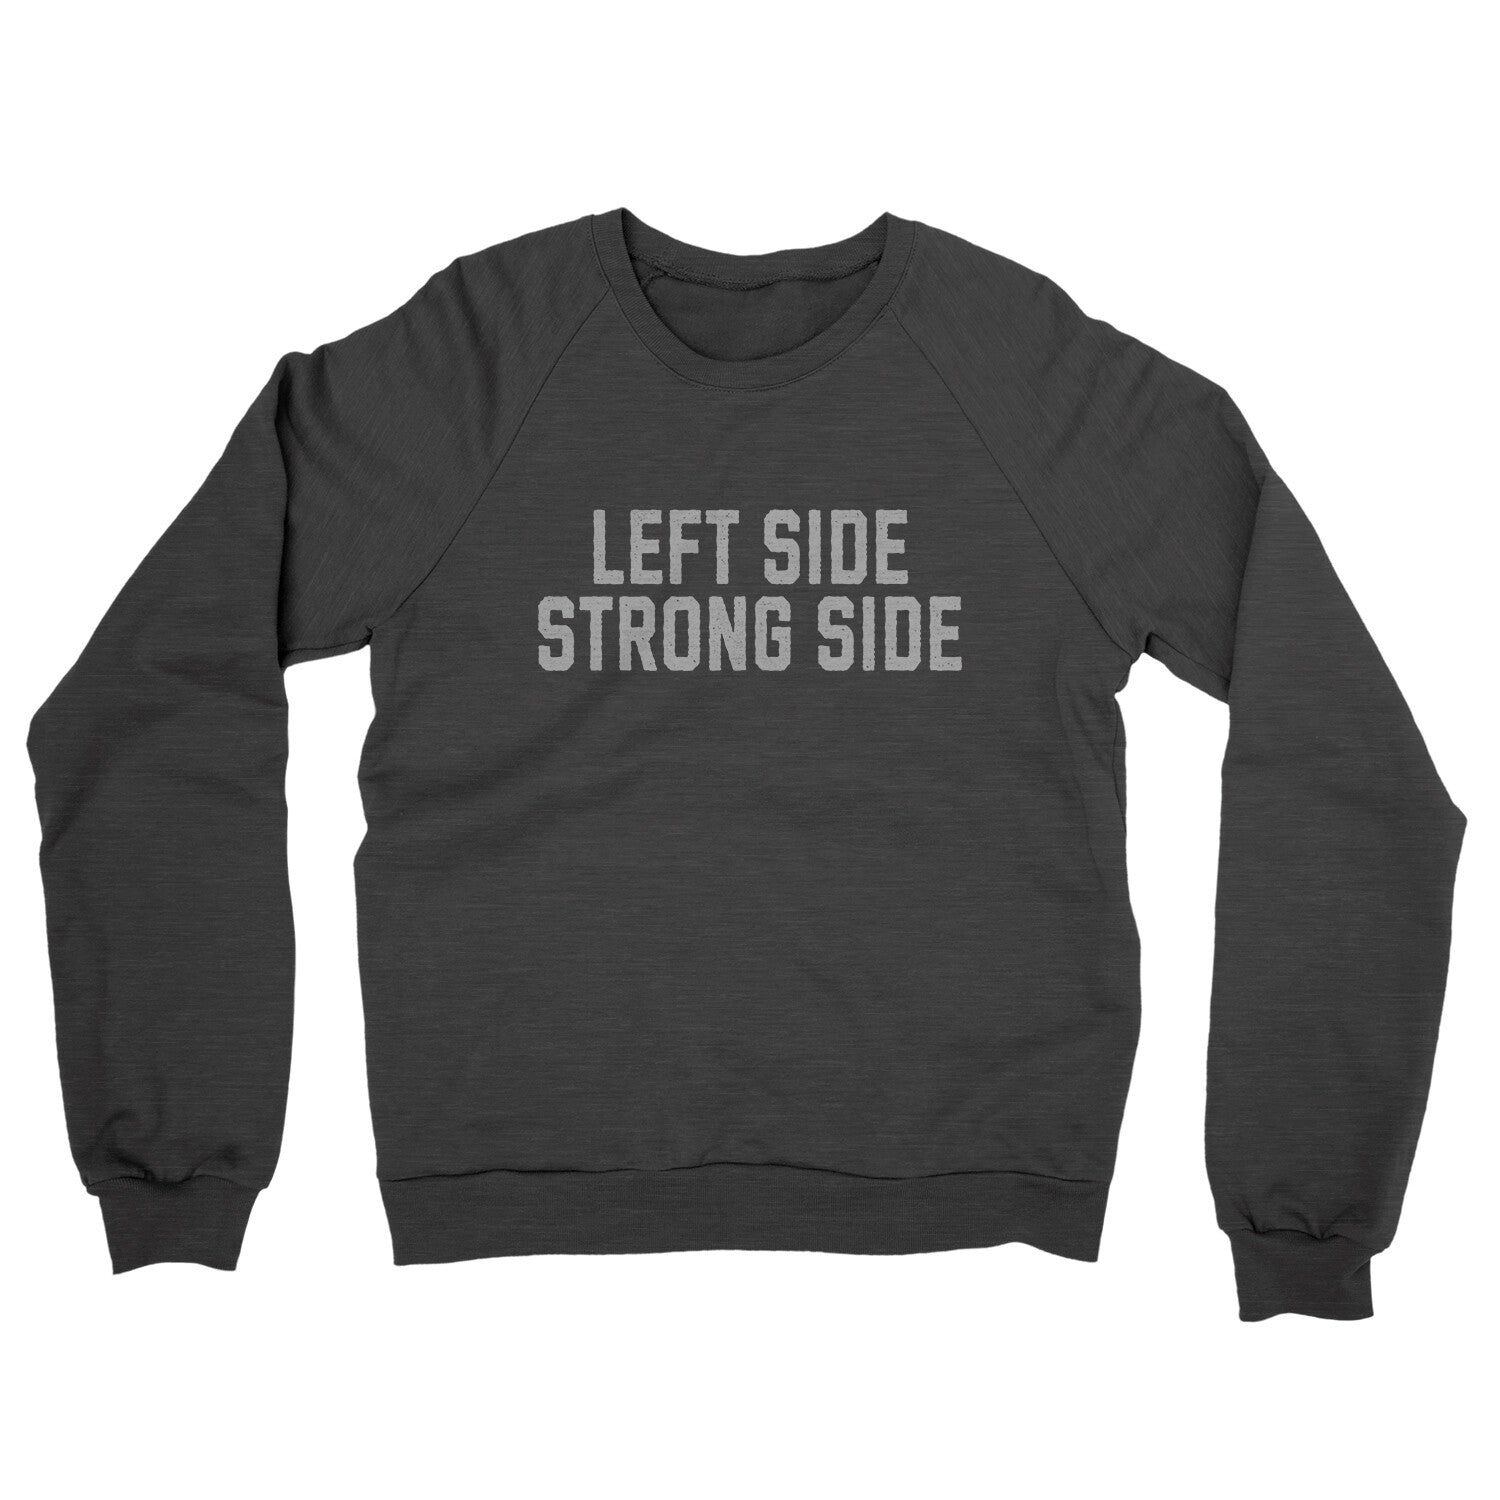 Left Side Strong Side in Charcoal Heather Color